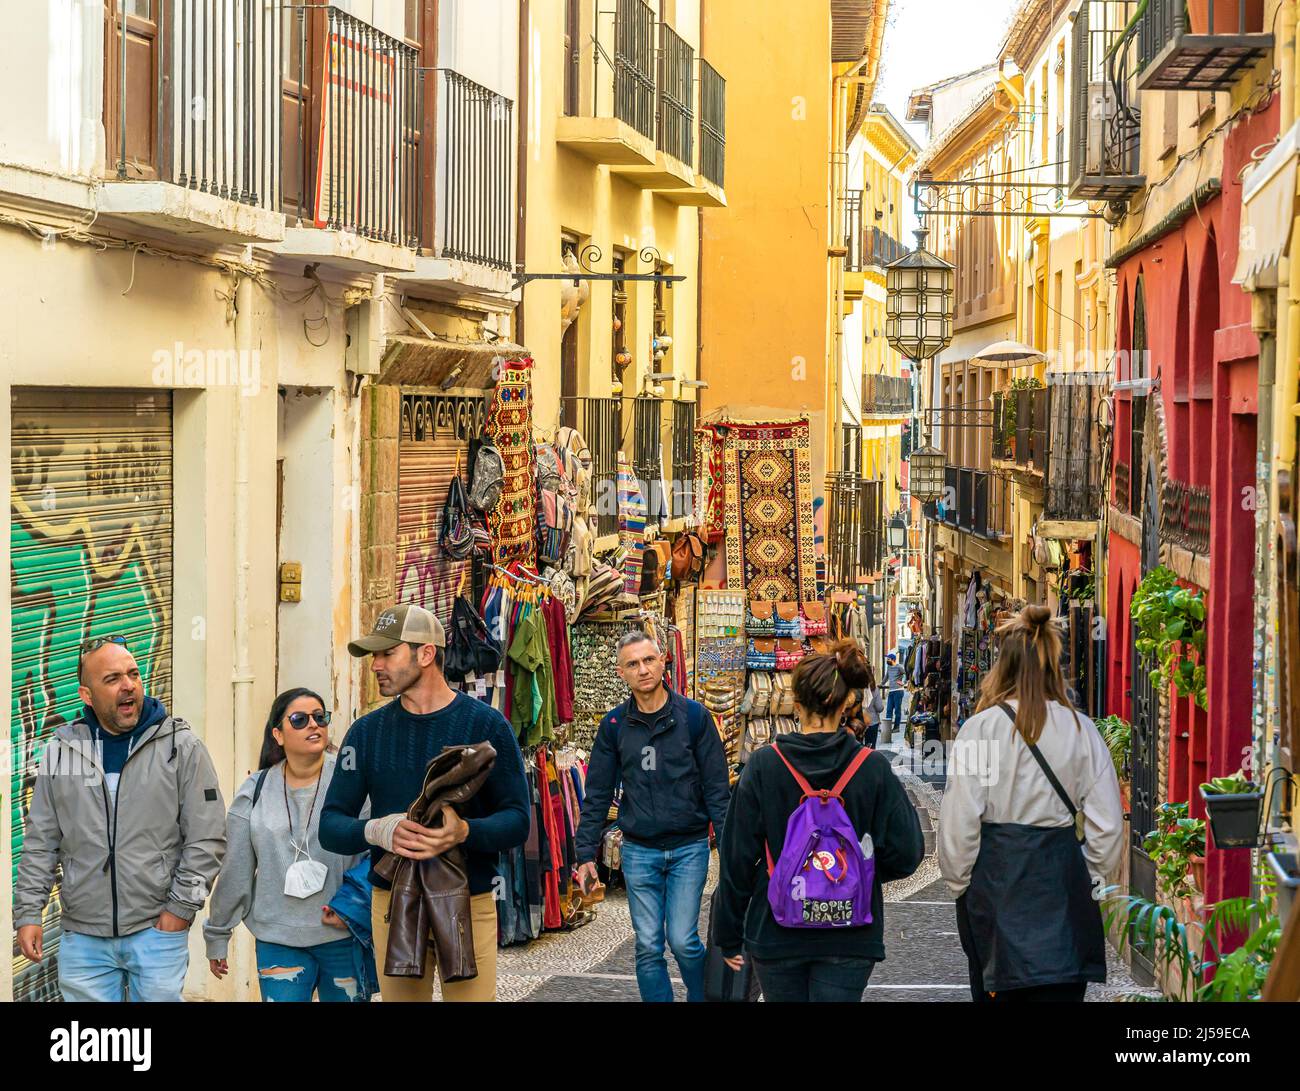 Calle Calderería Nueva -  narrow alleyway, busy little street with shops businesses offering traditional authentic goods and crafts. Granada, Spain Stock Photo